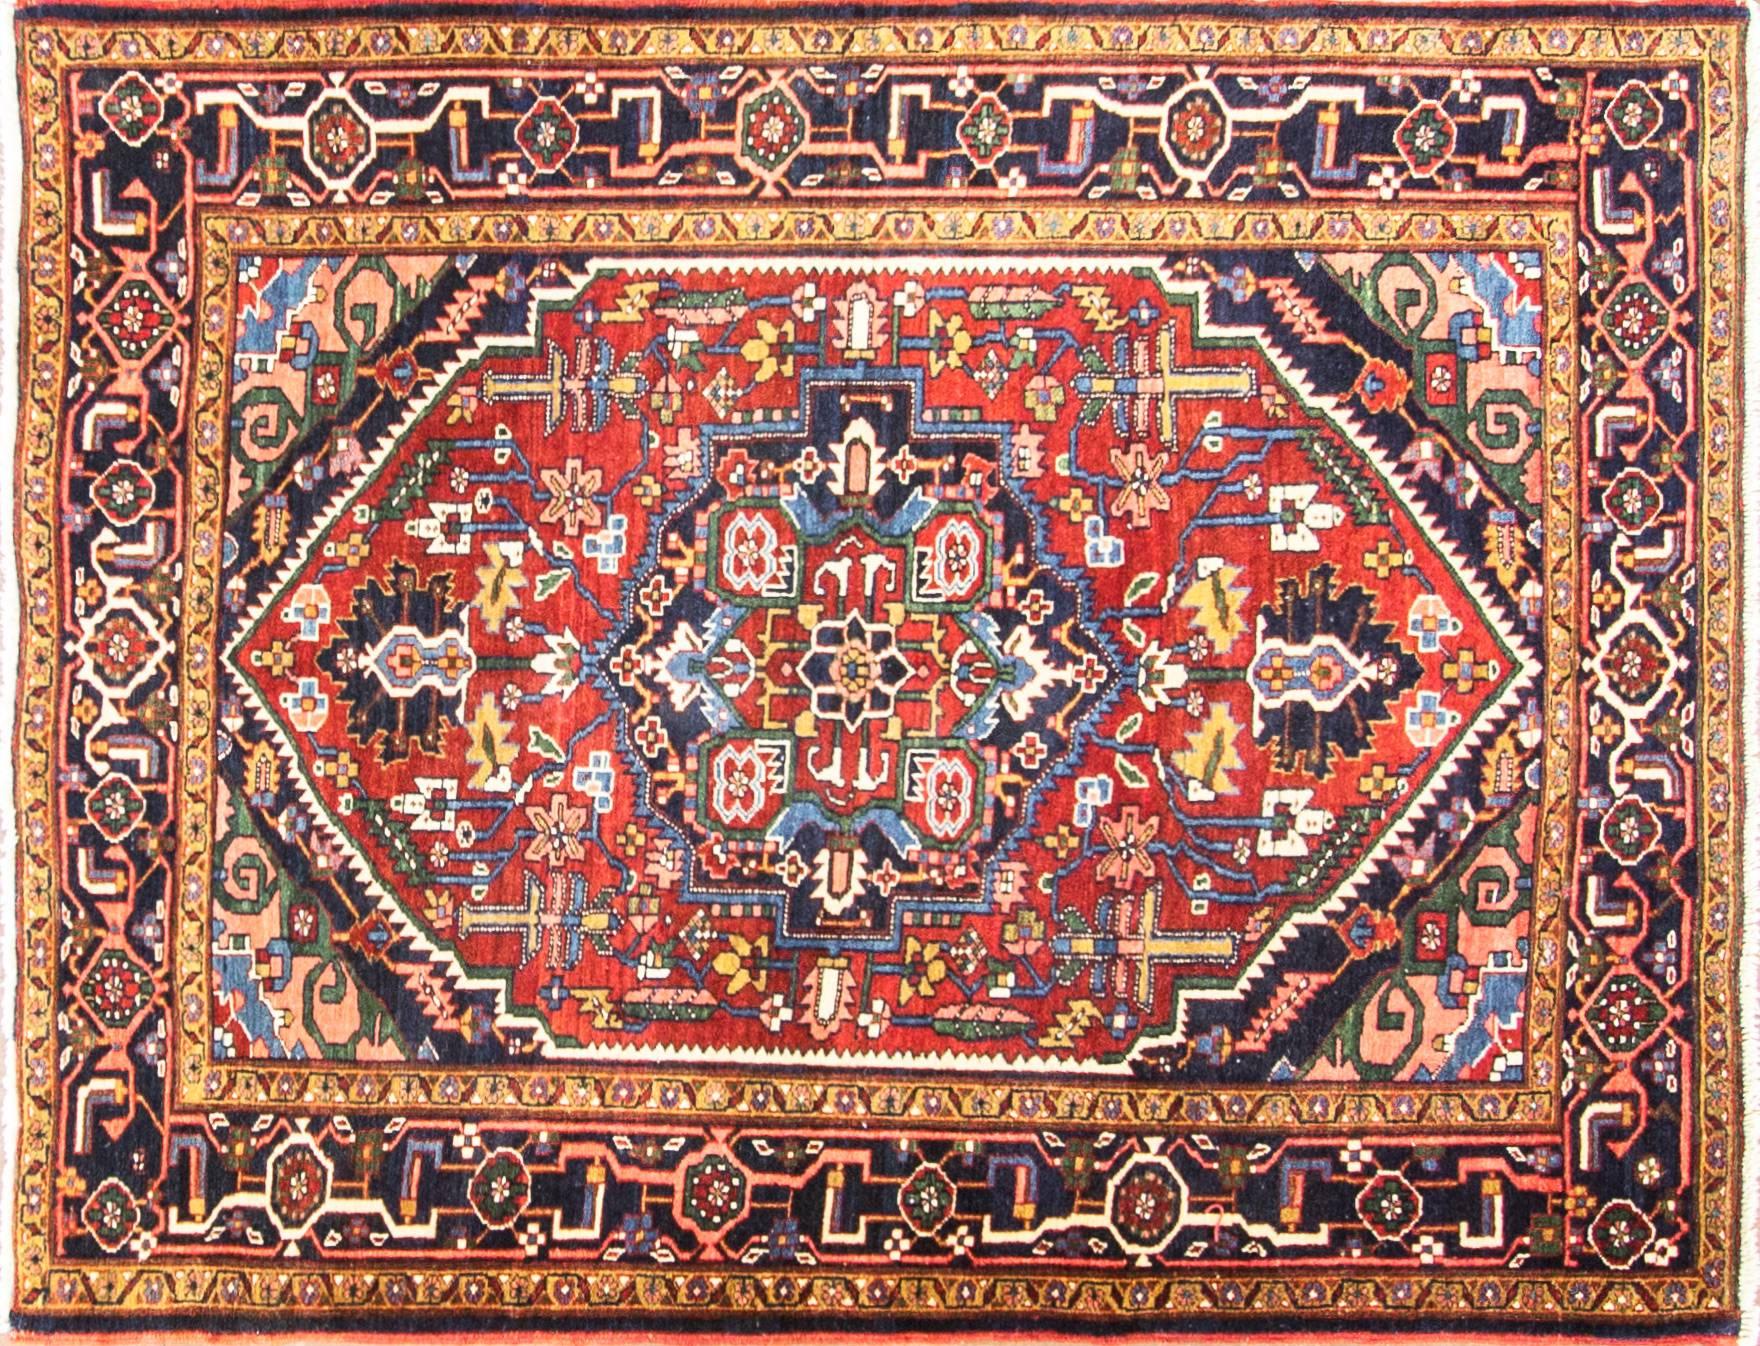 A great painting is measure by beauty of its colors and the same statement goes for this rug. Heriz rugs are Persian rugs from the area of Heris, East Azerbaijan in northwest Iran, northeast of Tabriz. Such rugs are produced in the village of the